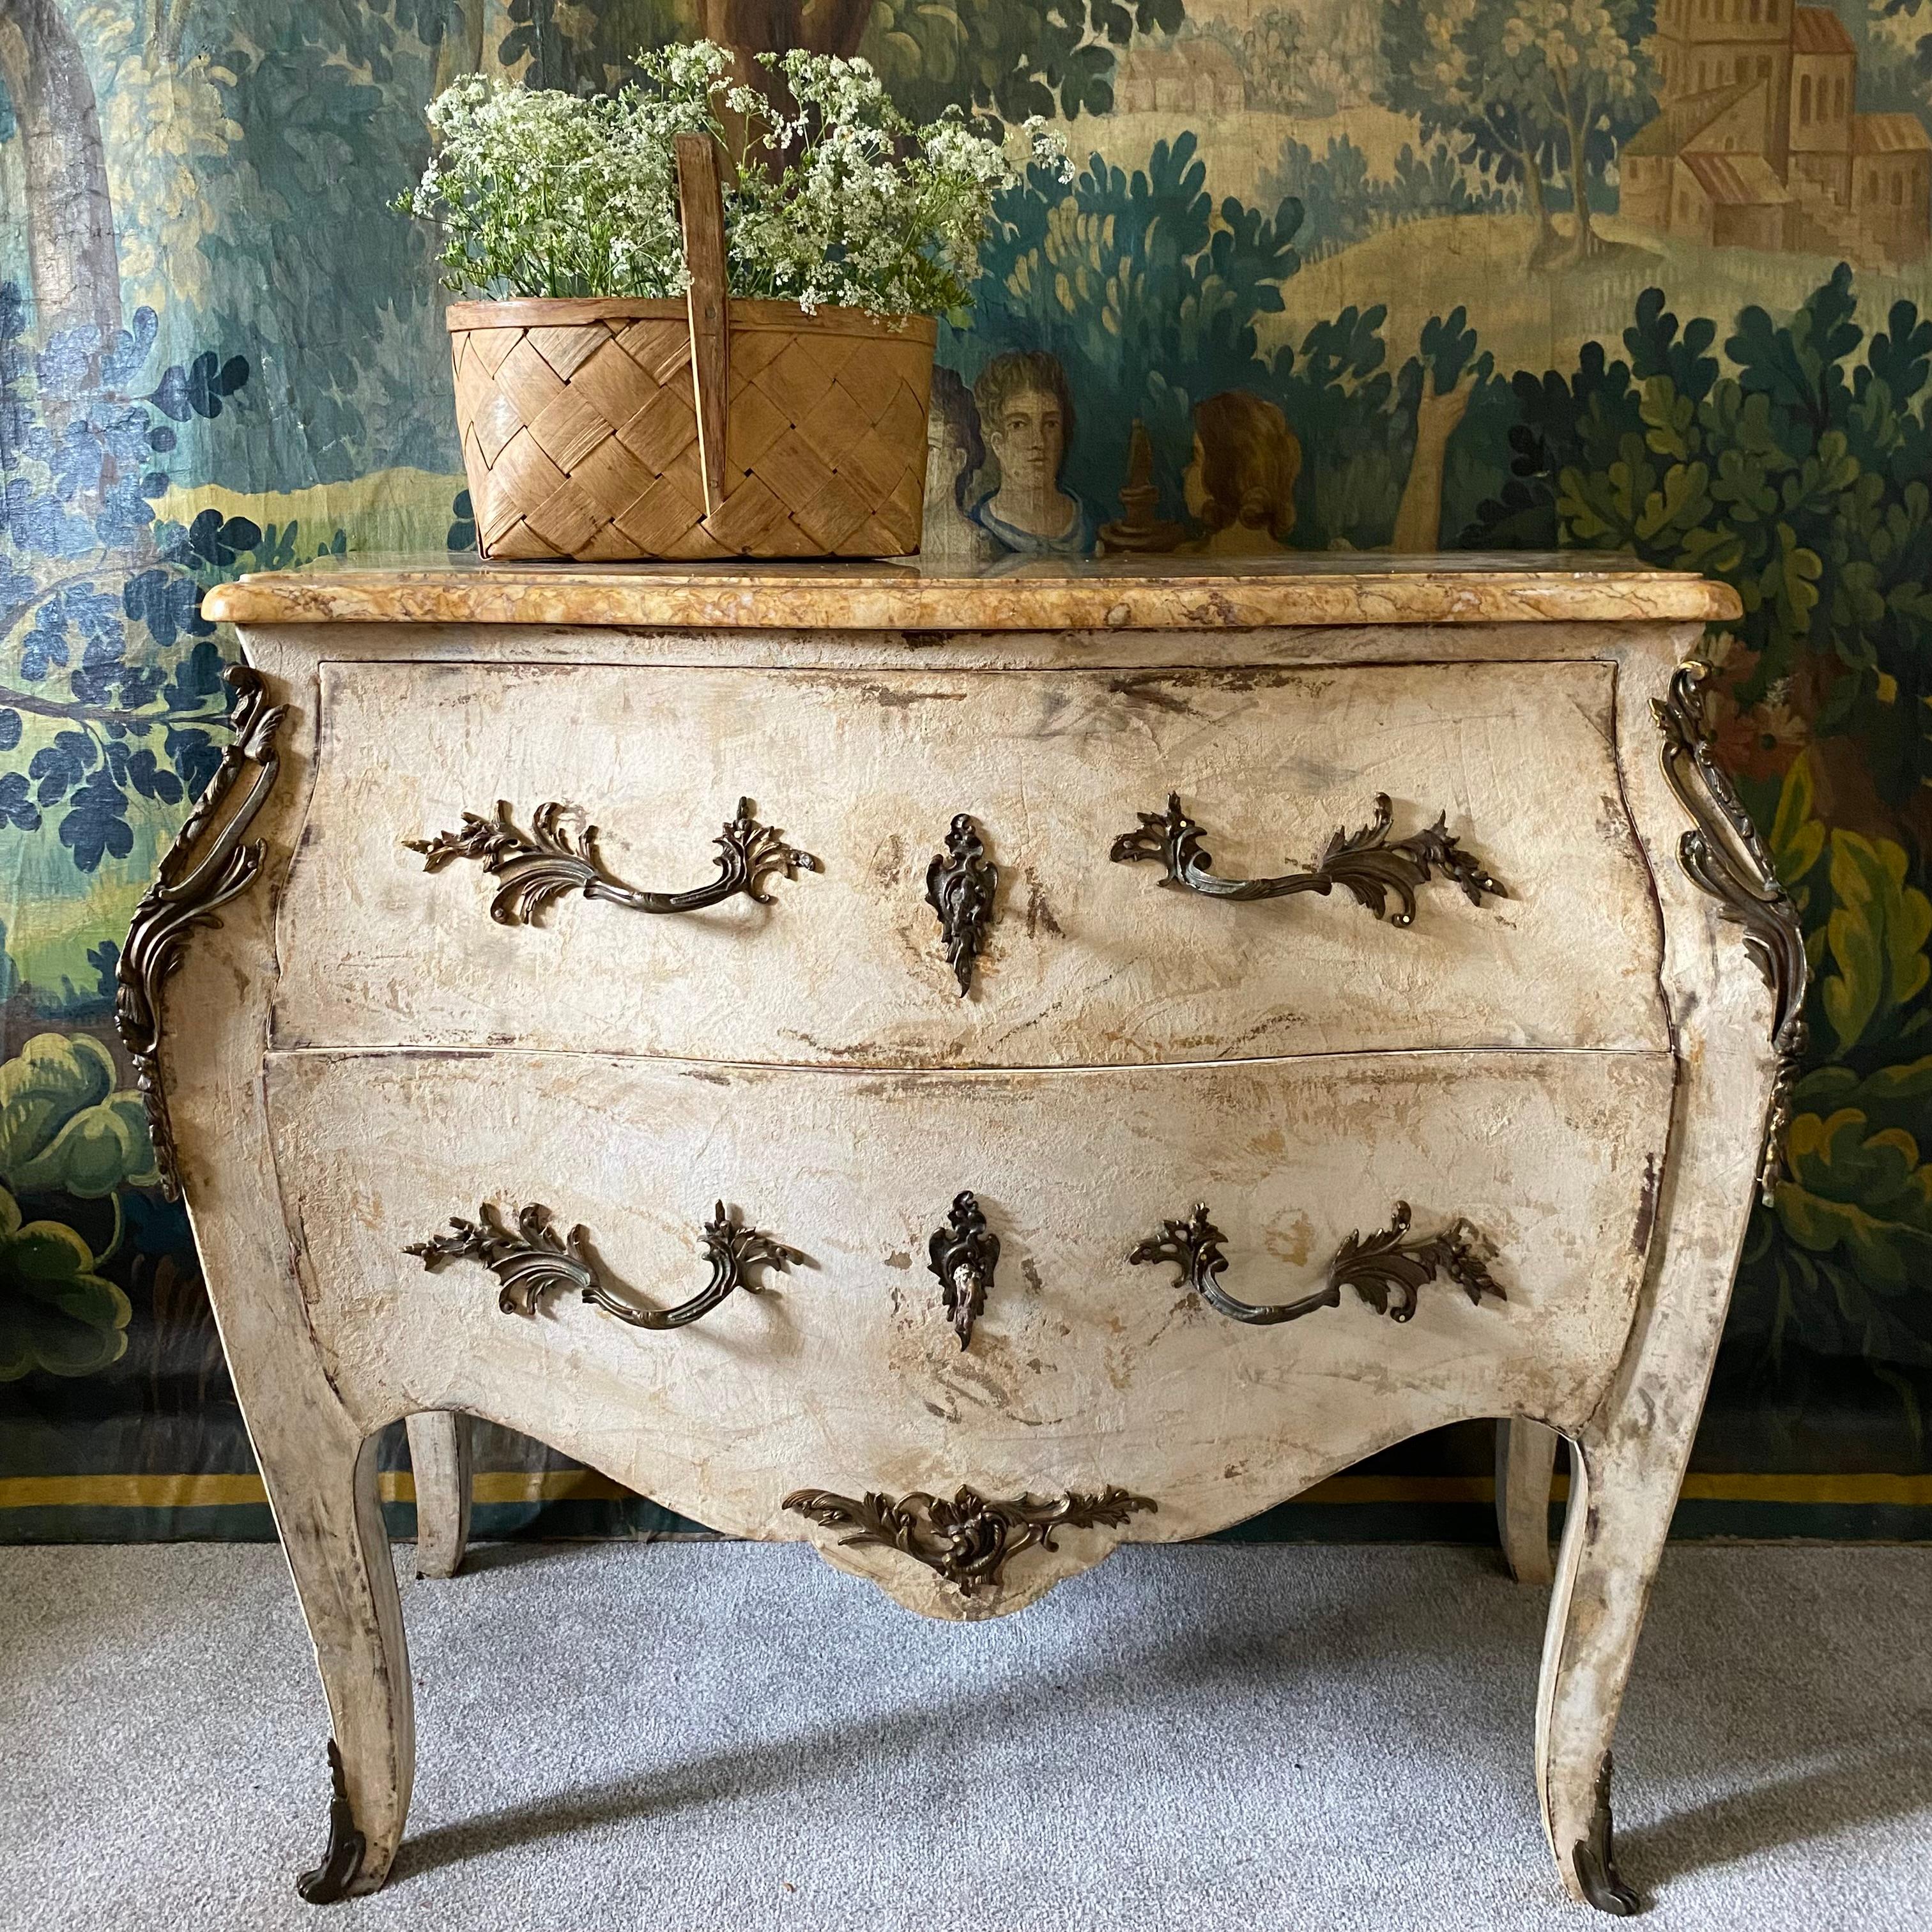 A superb high quality 18th century French rococo bombe shaped commode - in oak with two deep drawers in a faux marble painted finish with a beautiful real shaped marble top - the metal decorations and handles appear to be bronze - the chest and